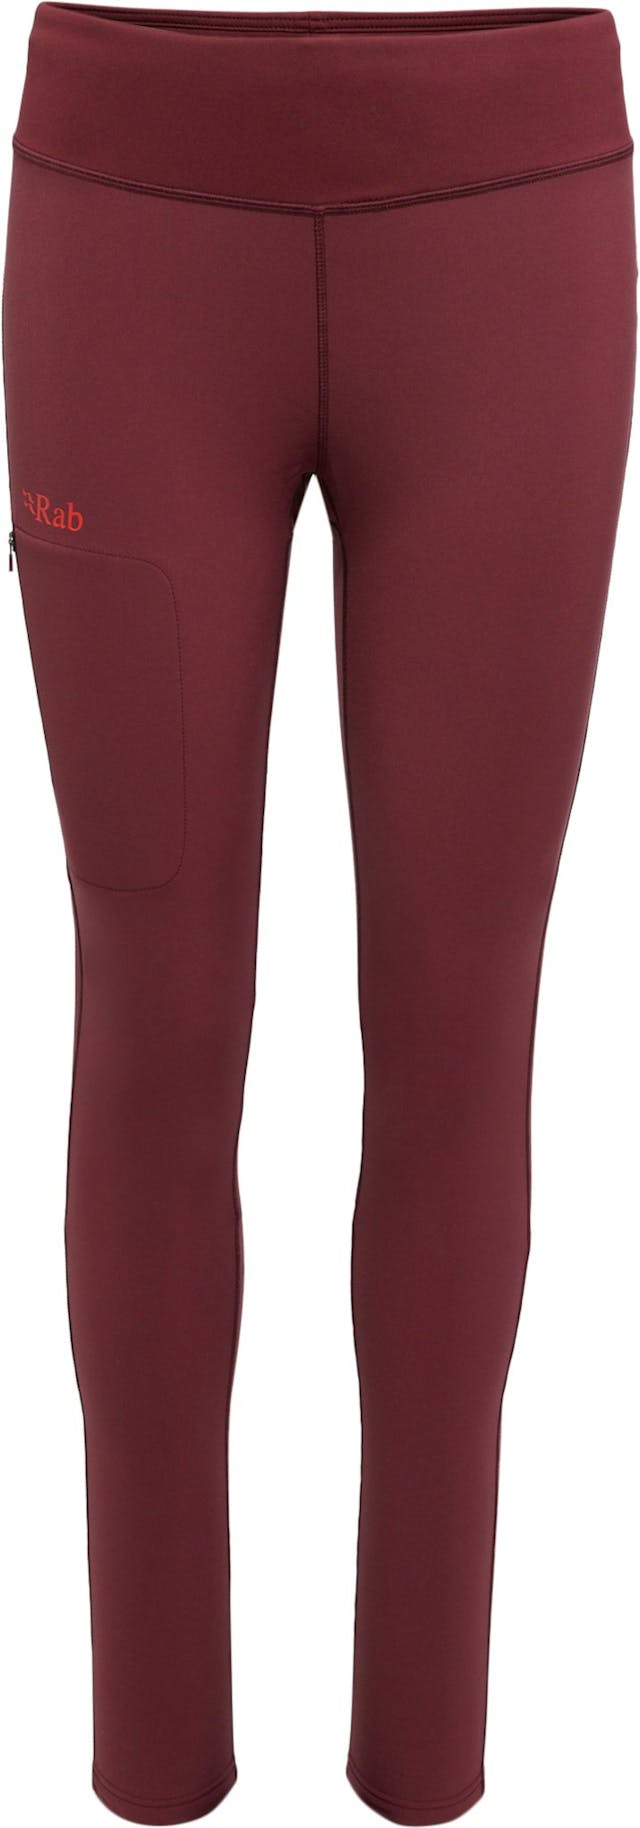 Product image for Rhombic Tights - Women's